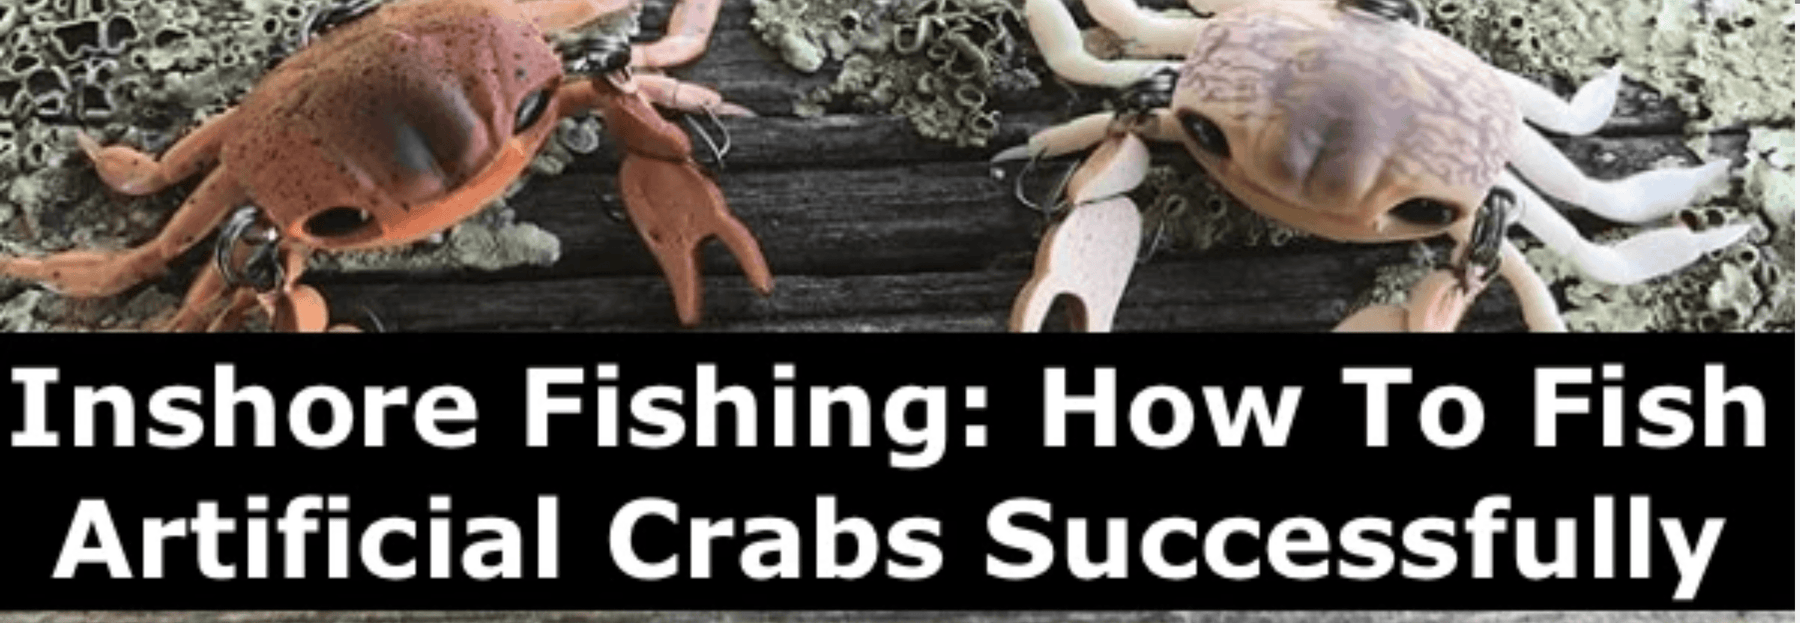 Inshore Fishing - How to Fish Artificial Crabs Successfully